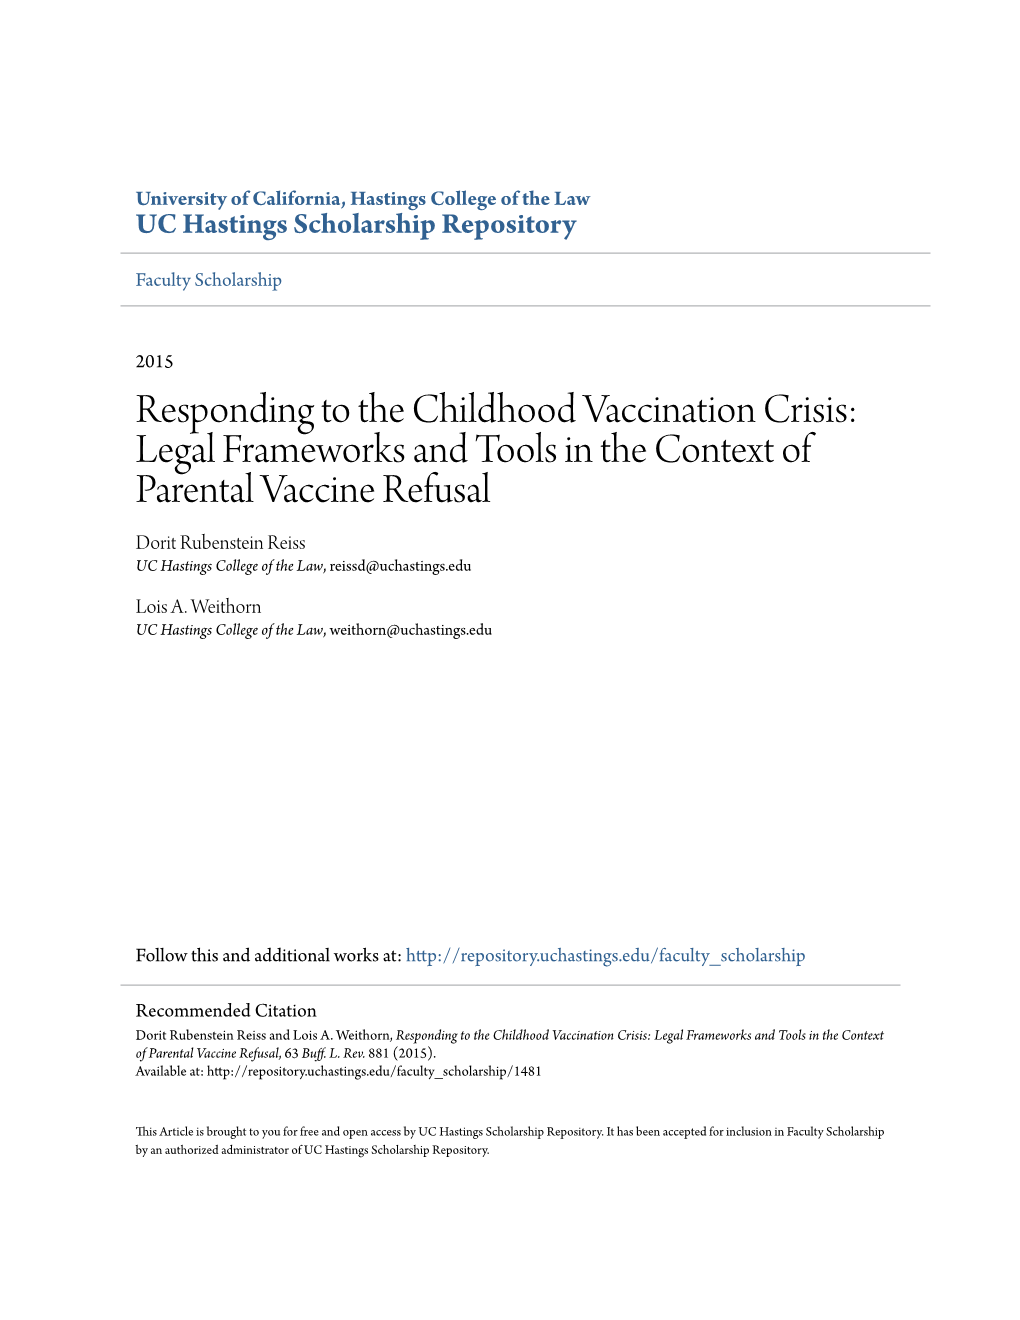 Responding to the Childhood Vaccination Crisis